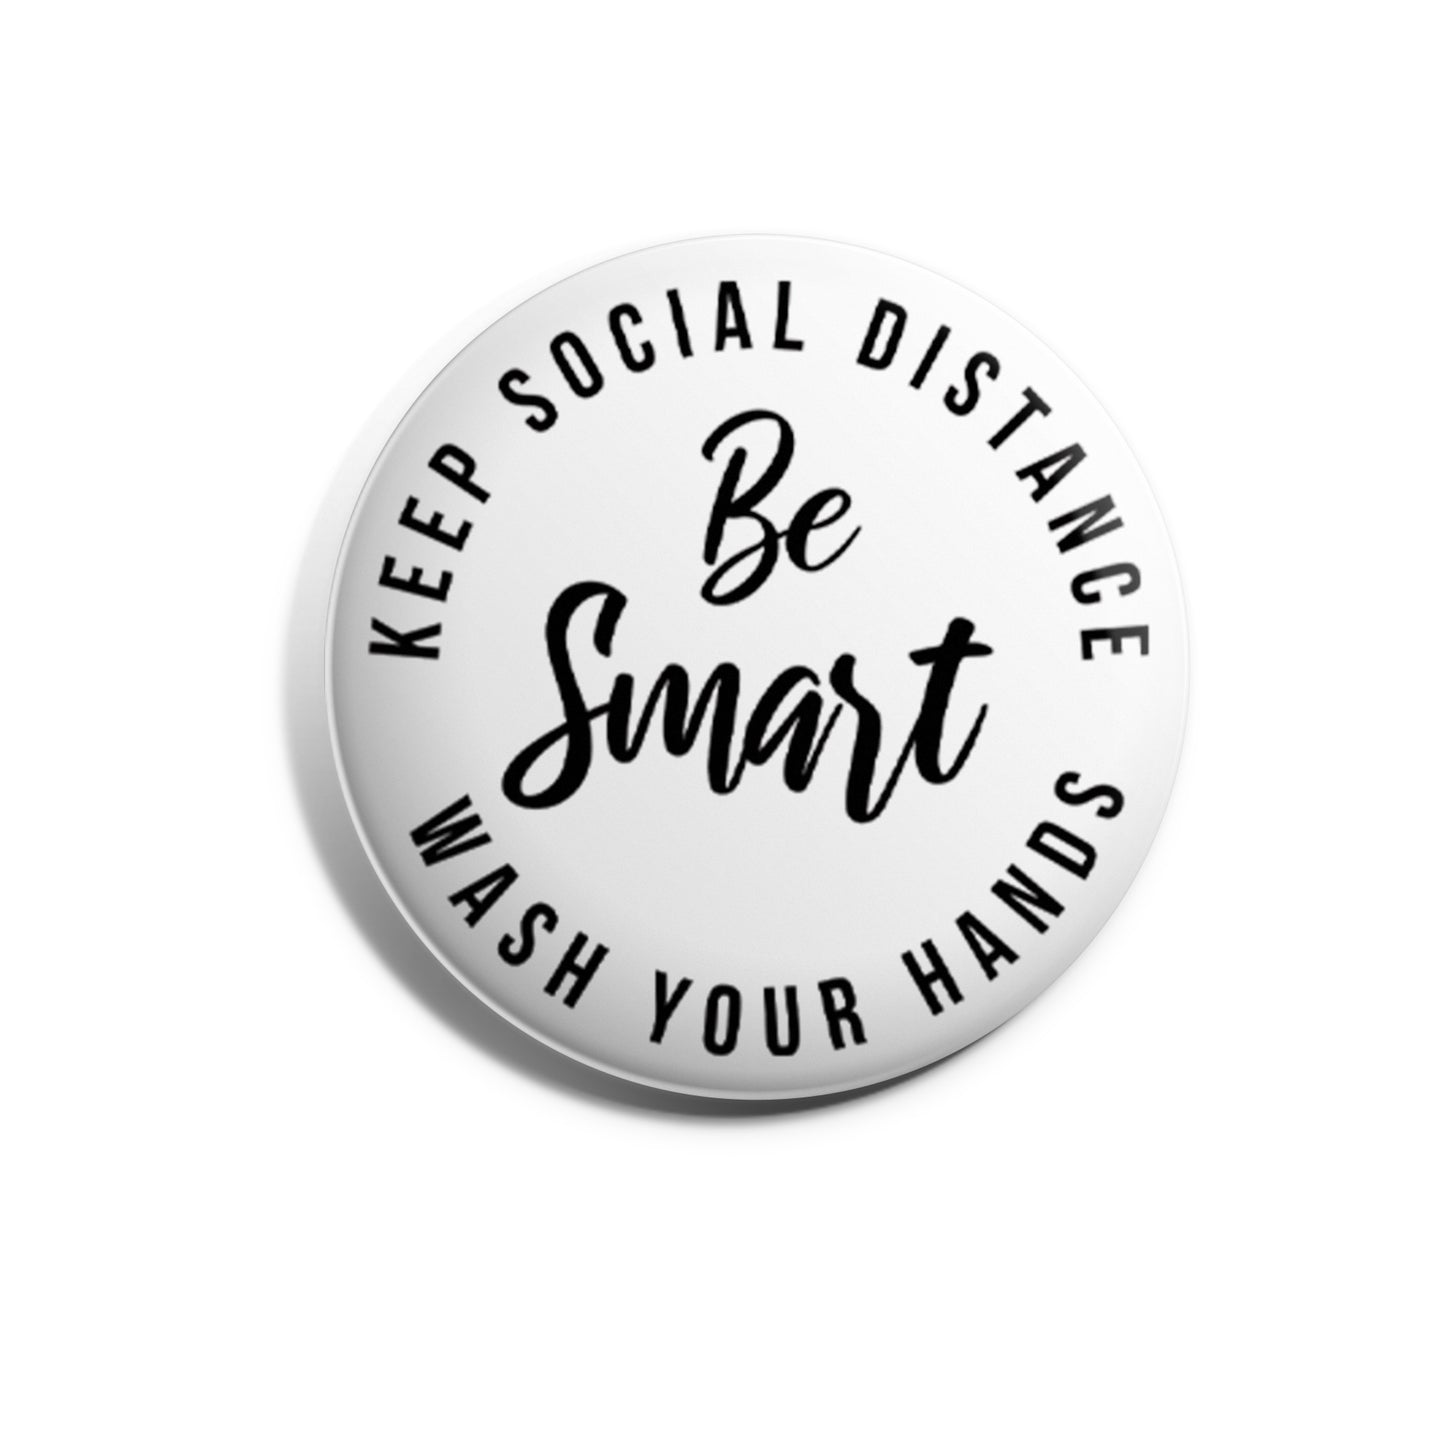 Be Smart, Keep Social Distance, Wash Your Hands